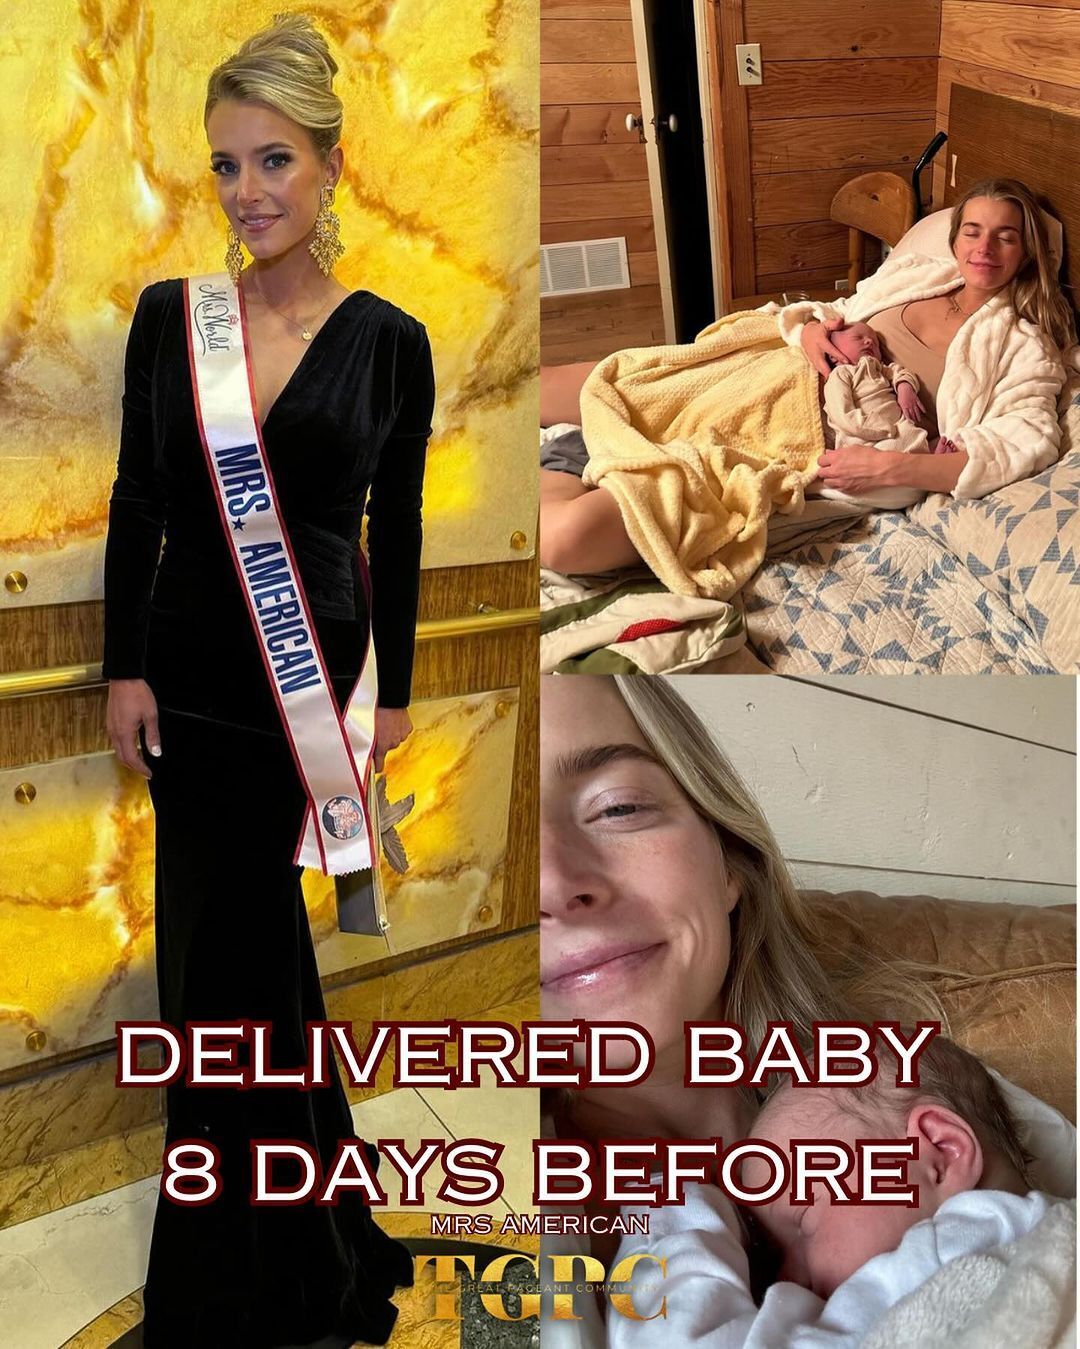 Losing 68 kg, beating cancer and giving birth to the eighth child 8 days before the contest: incredible stories of Mrs. World 2023 contestants